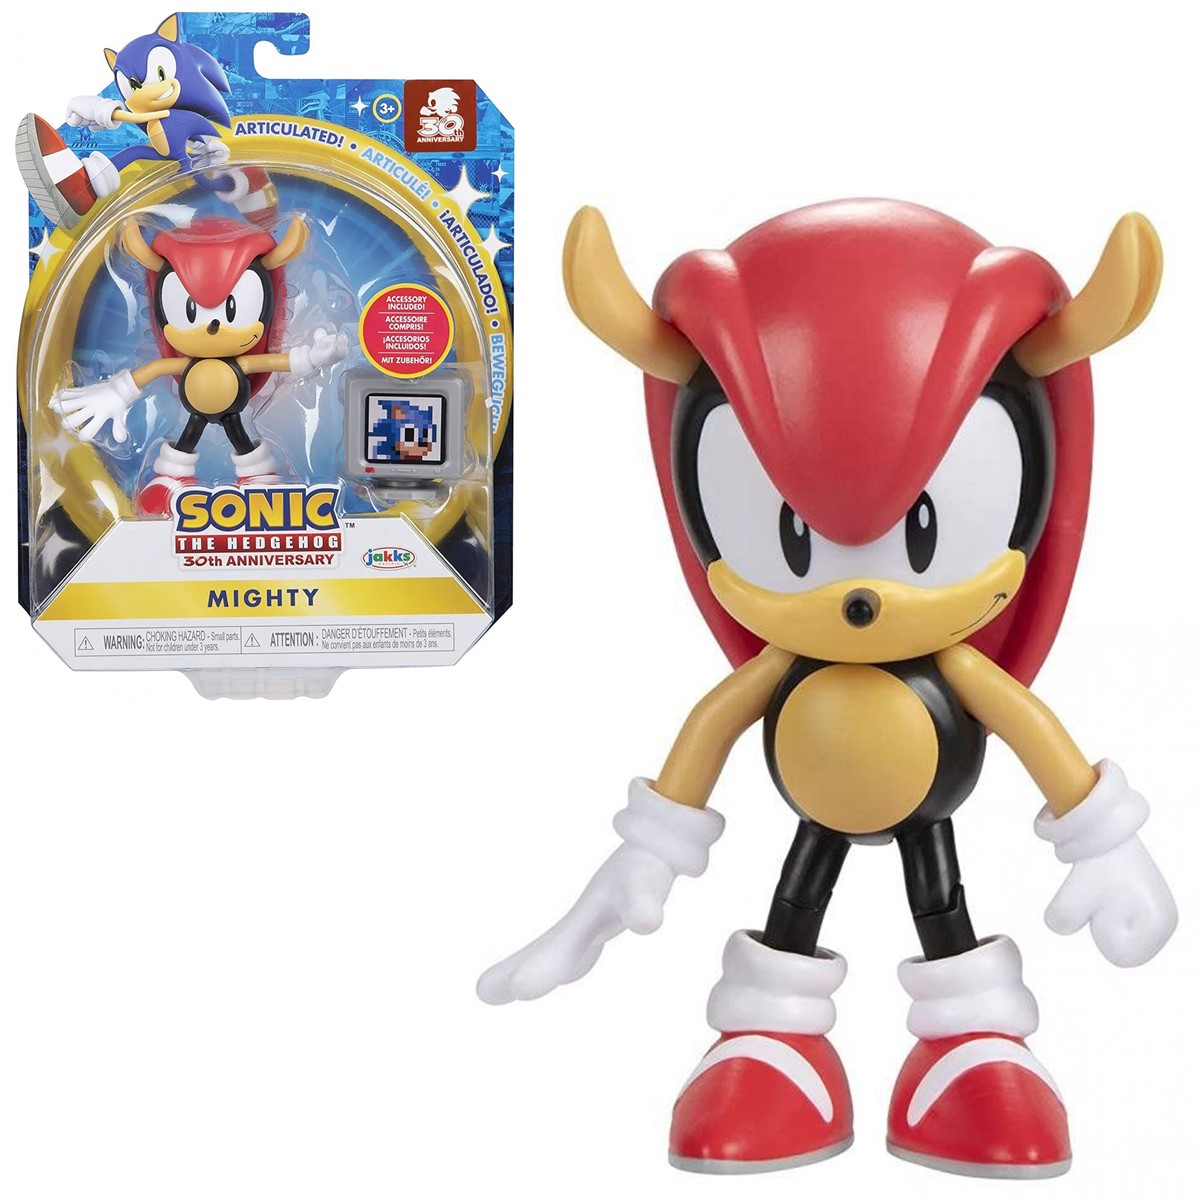 Sonic The Hedgehog - 30th Ann Articulated Figurine incl. Accessory - Mighty, 10 cm